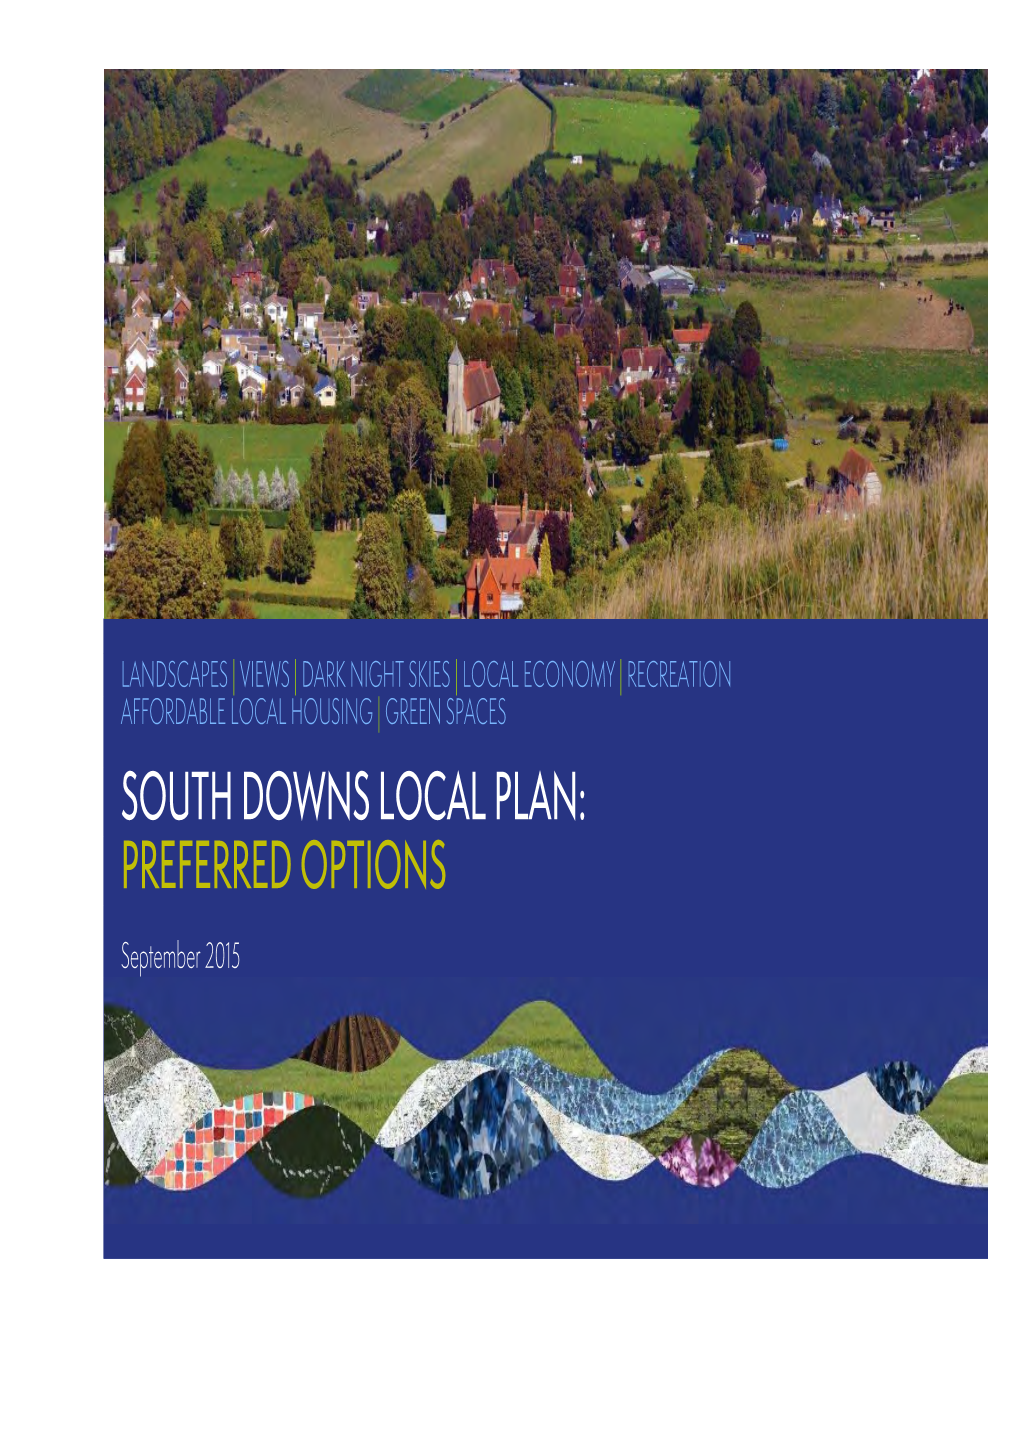 South Downs Local Plan: Preferred Options